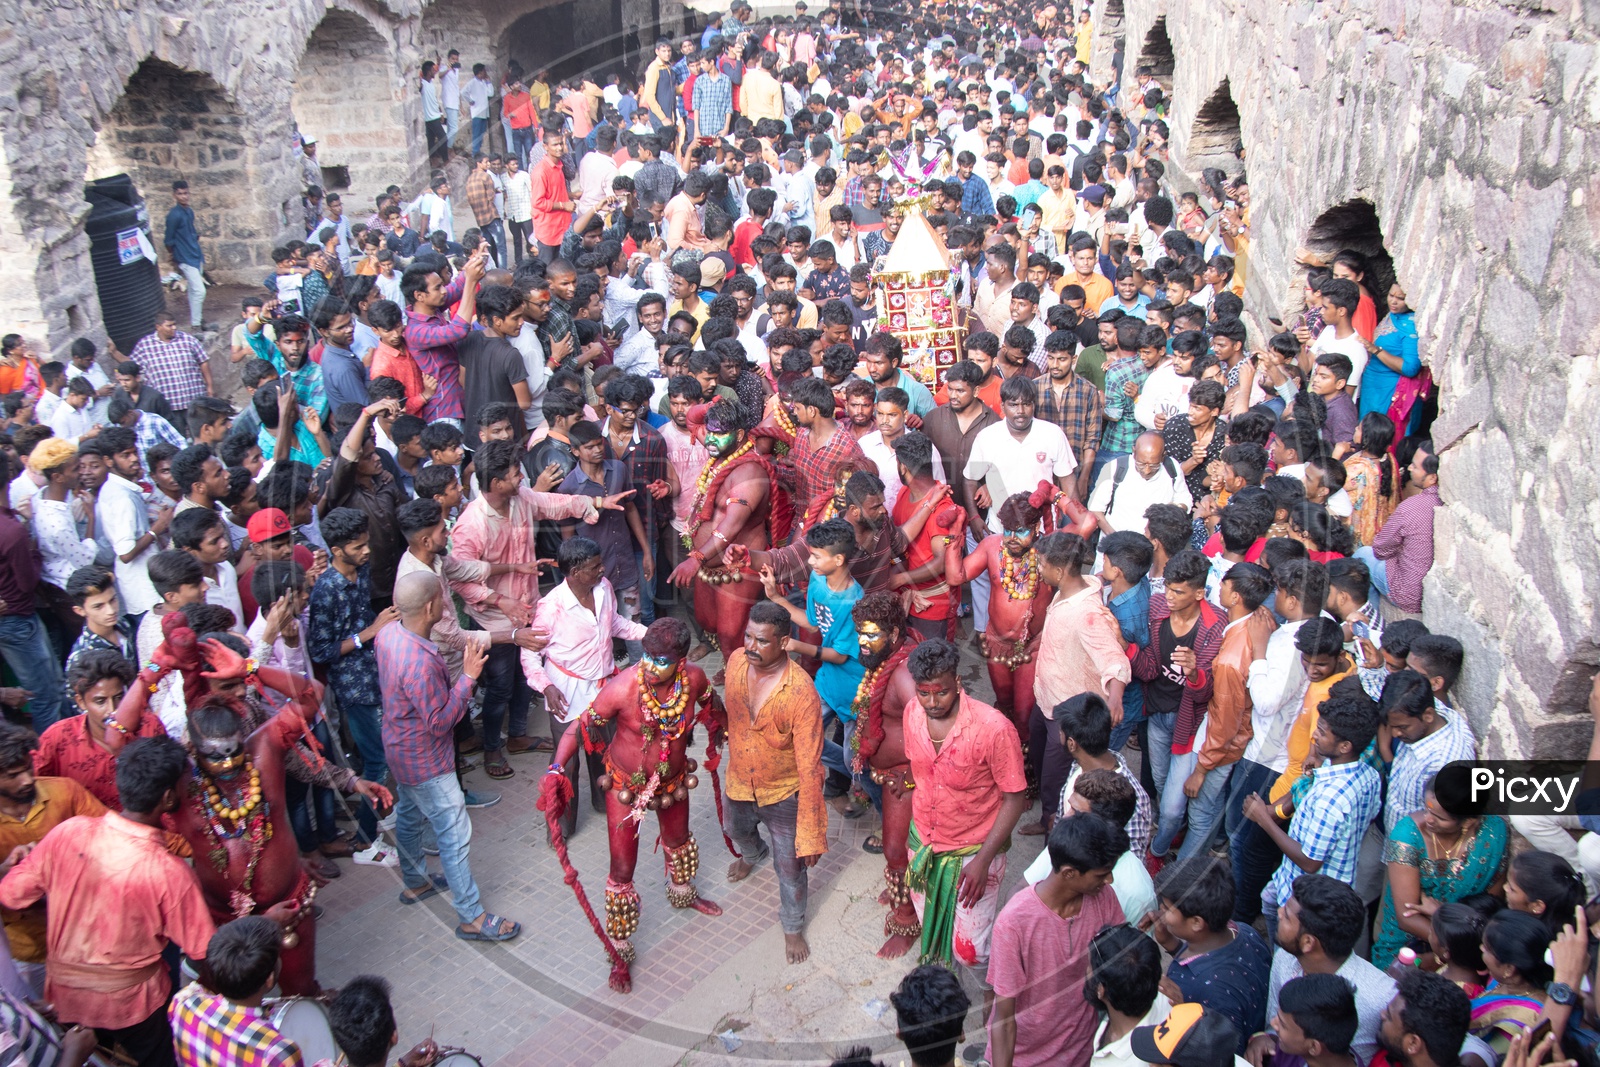 Pothuraju Surrounded By Crowd During Bonalu Festival Celebrations At Golconda Fort